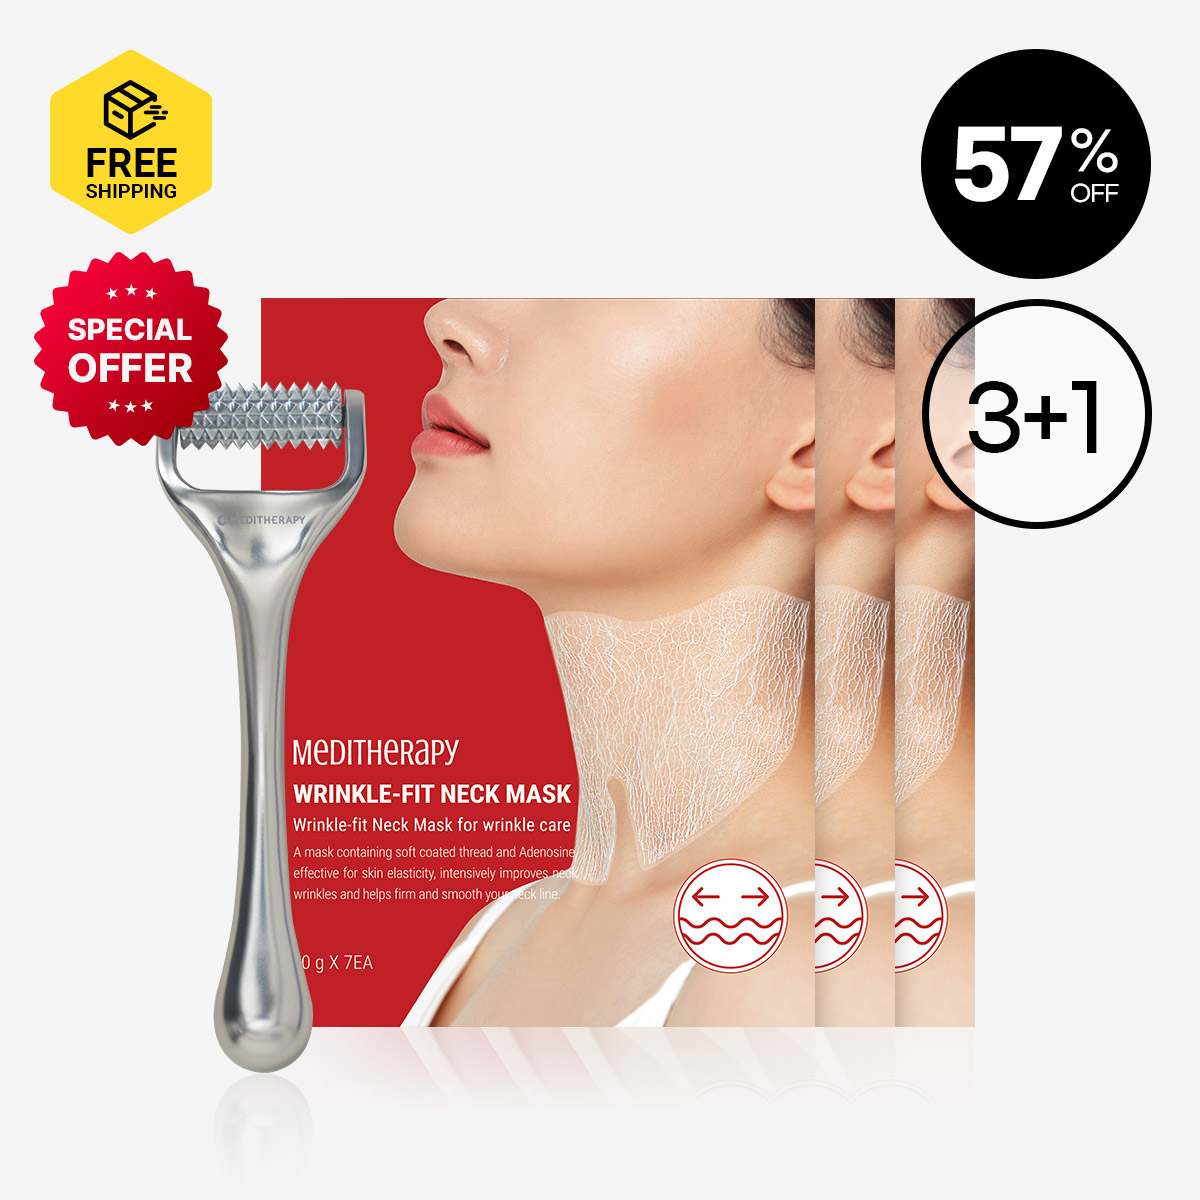 [MEDITHERAPY] Wrinkle-Fit Neck Mask 3 + Wrinkle-Fit Needle Roller 1